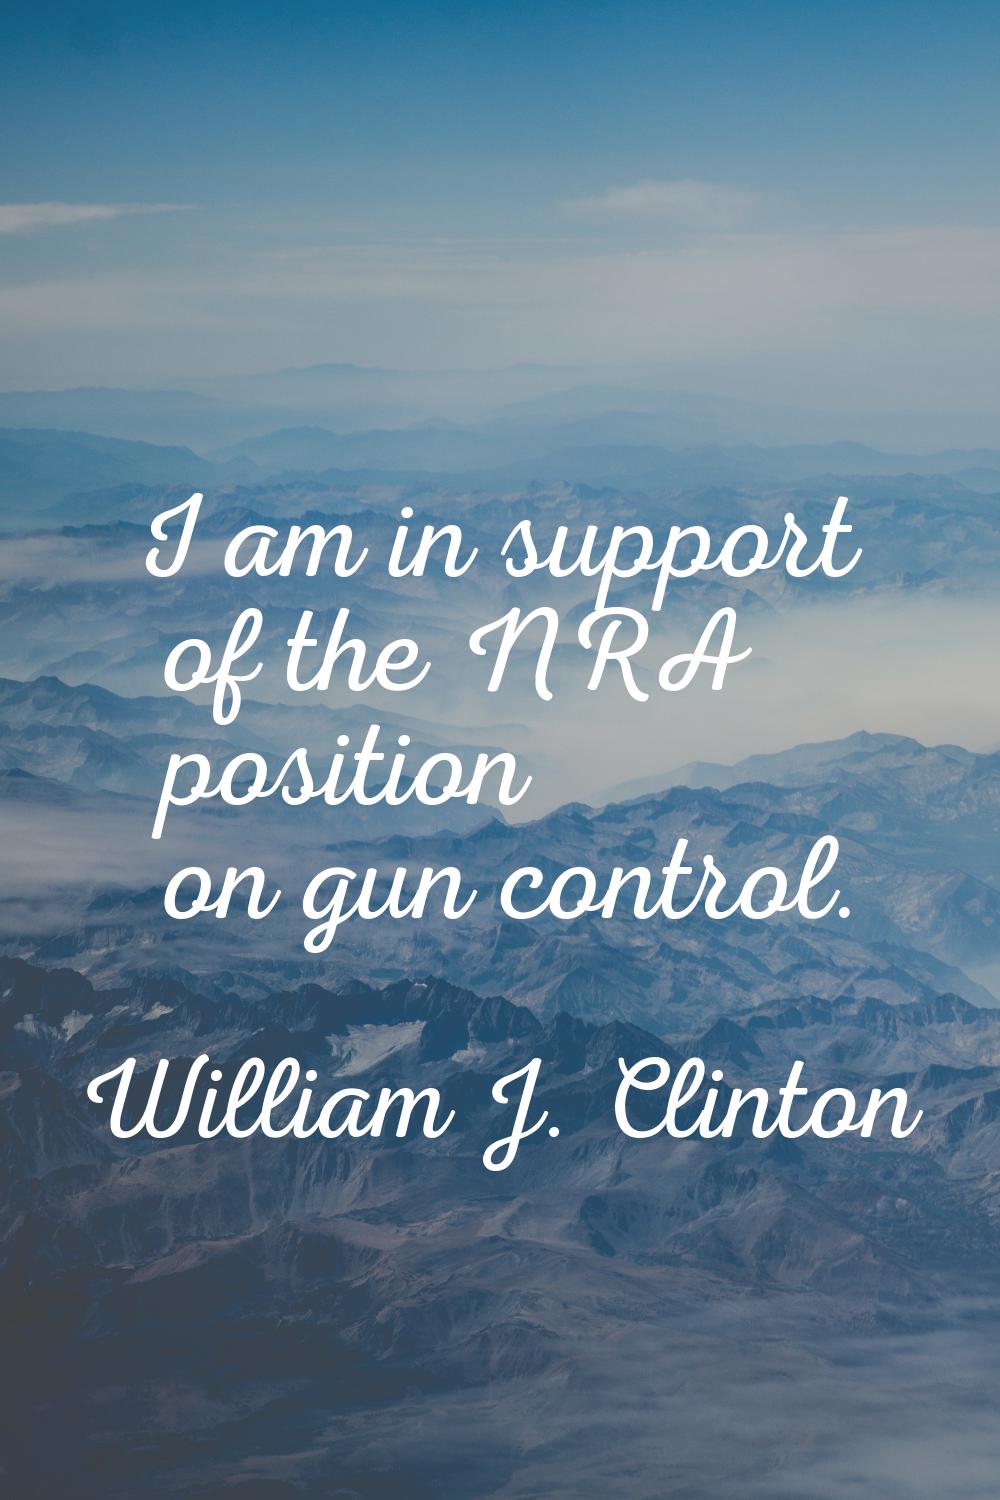 I am in support of the NRA position on gun control.